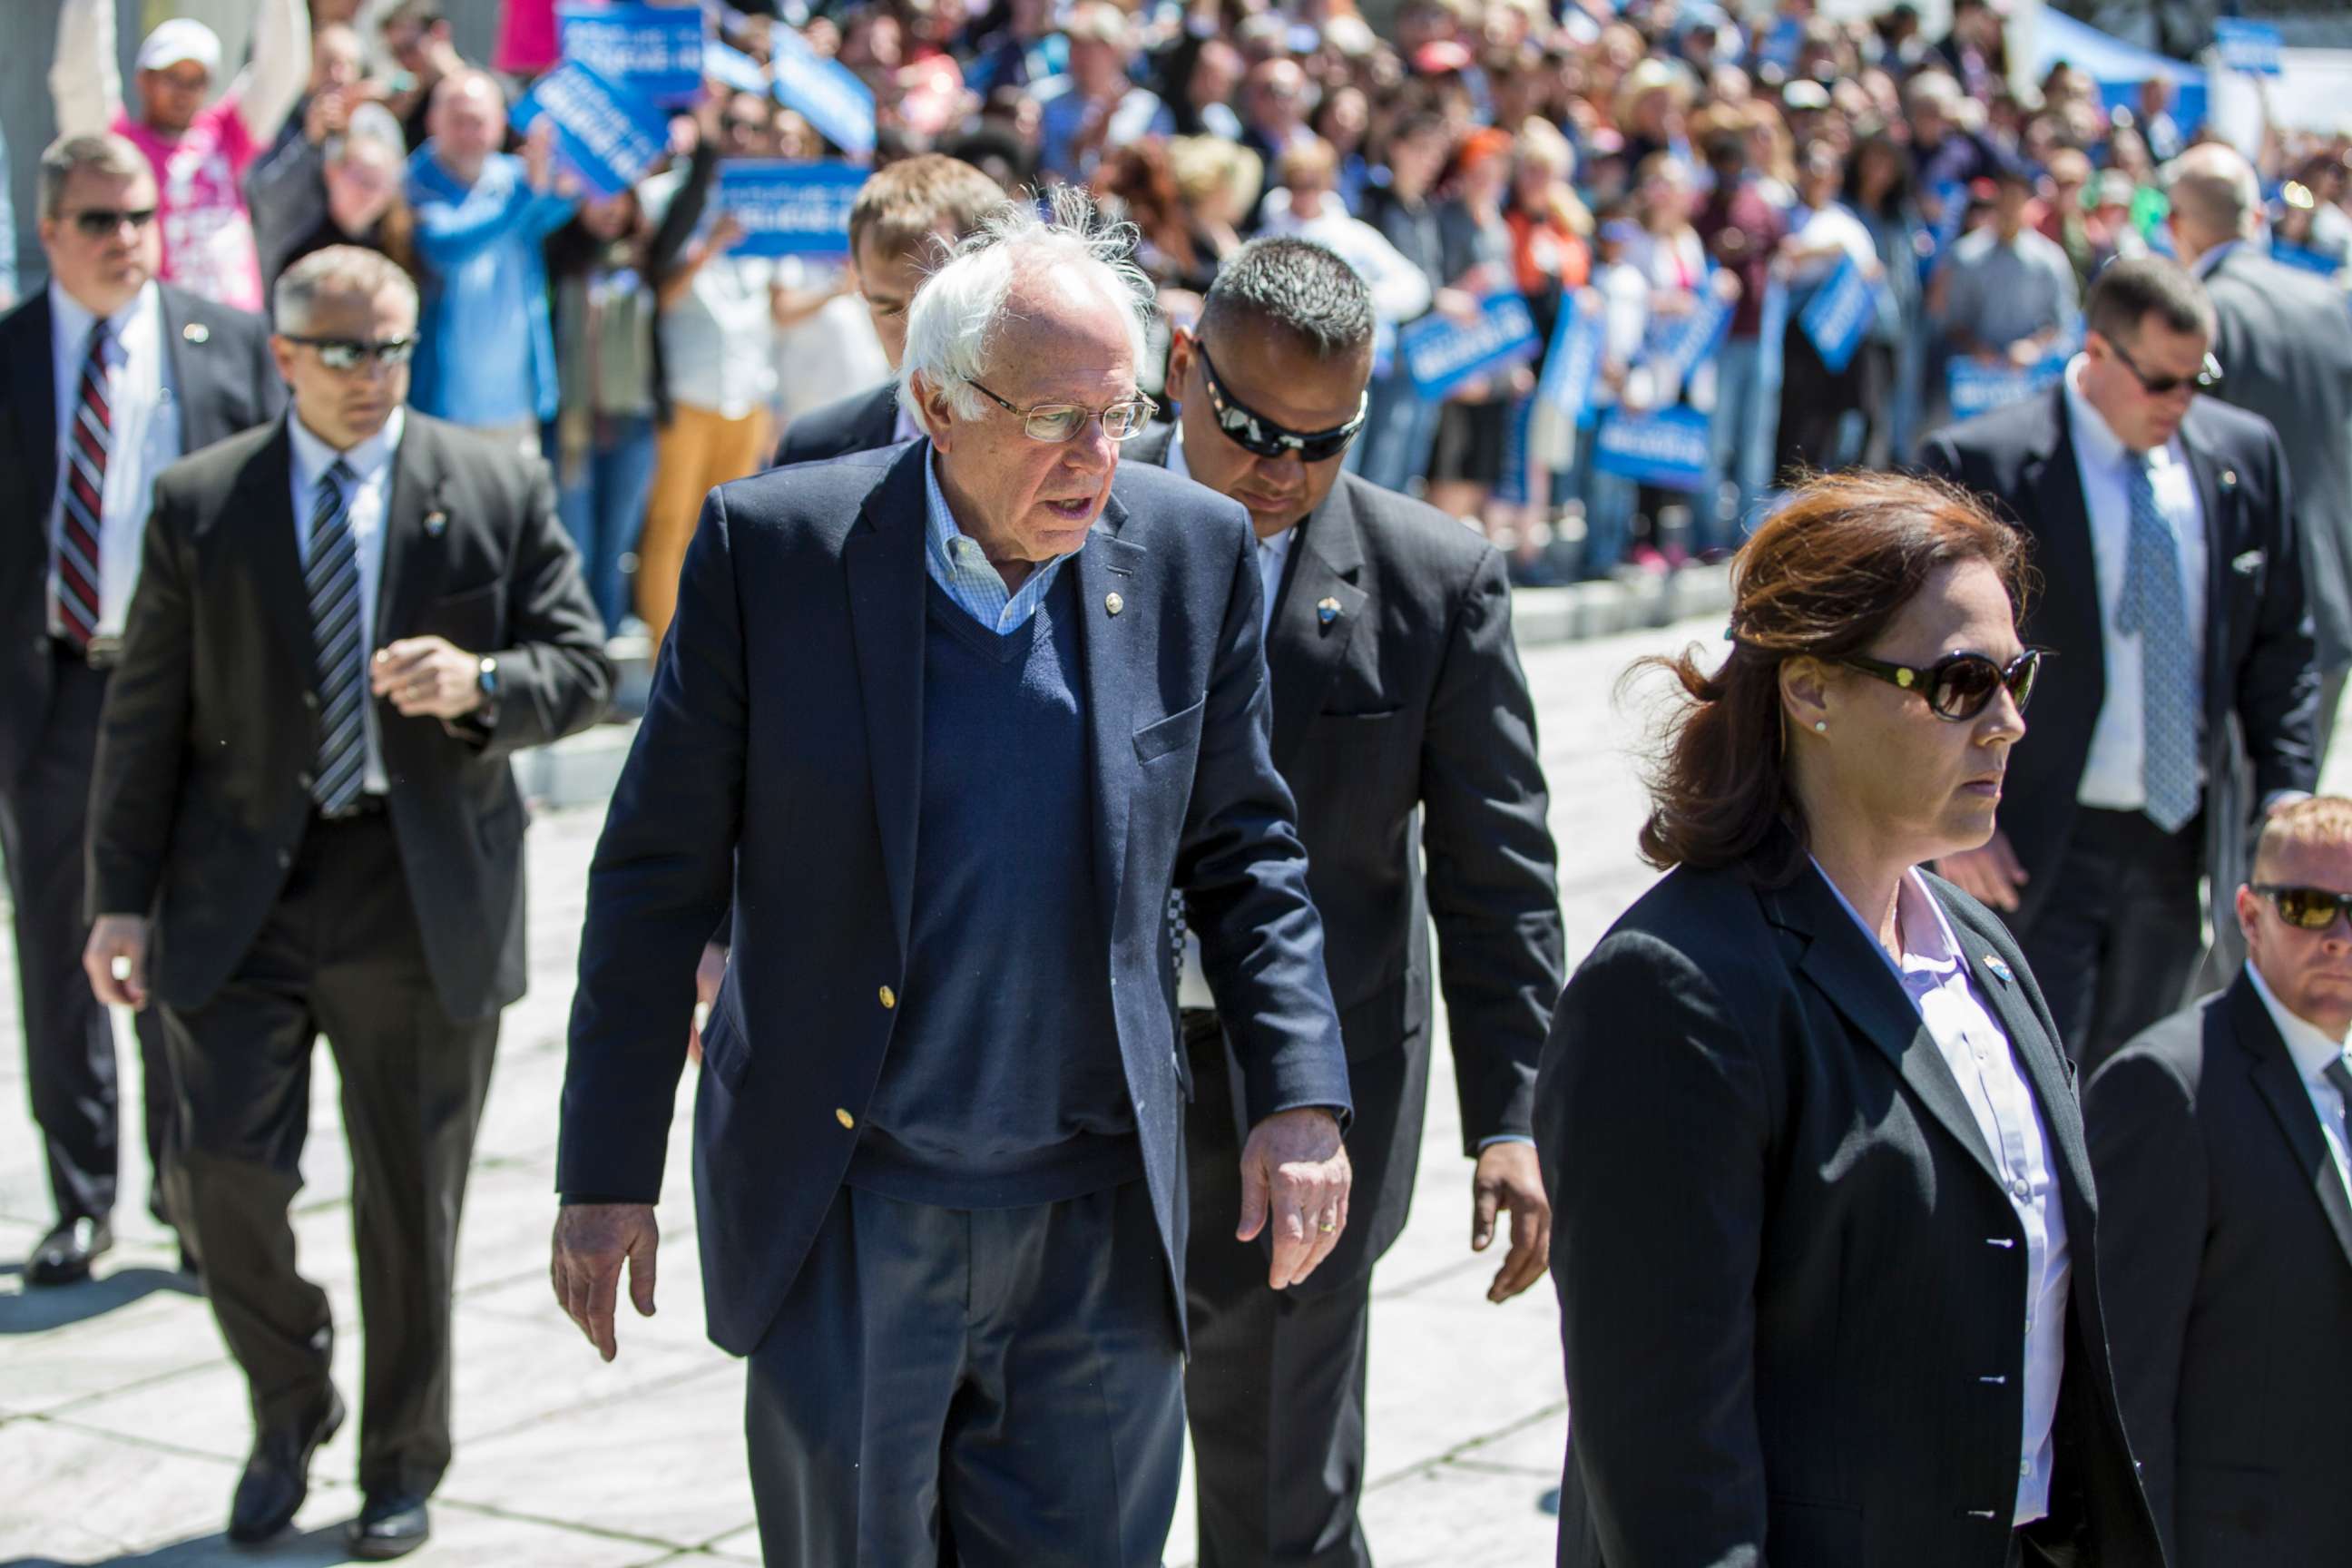 PHOTO: Democratic presidential candidate, U.S. Sen. Bernie Sanders is flanked by his Secret Service detail before greeting supporters following a rally at Roger Williams Park on April 24, 2016 in Providence, Rhode Island. 